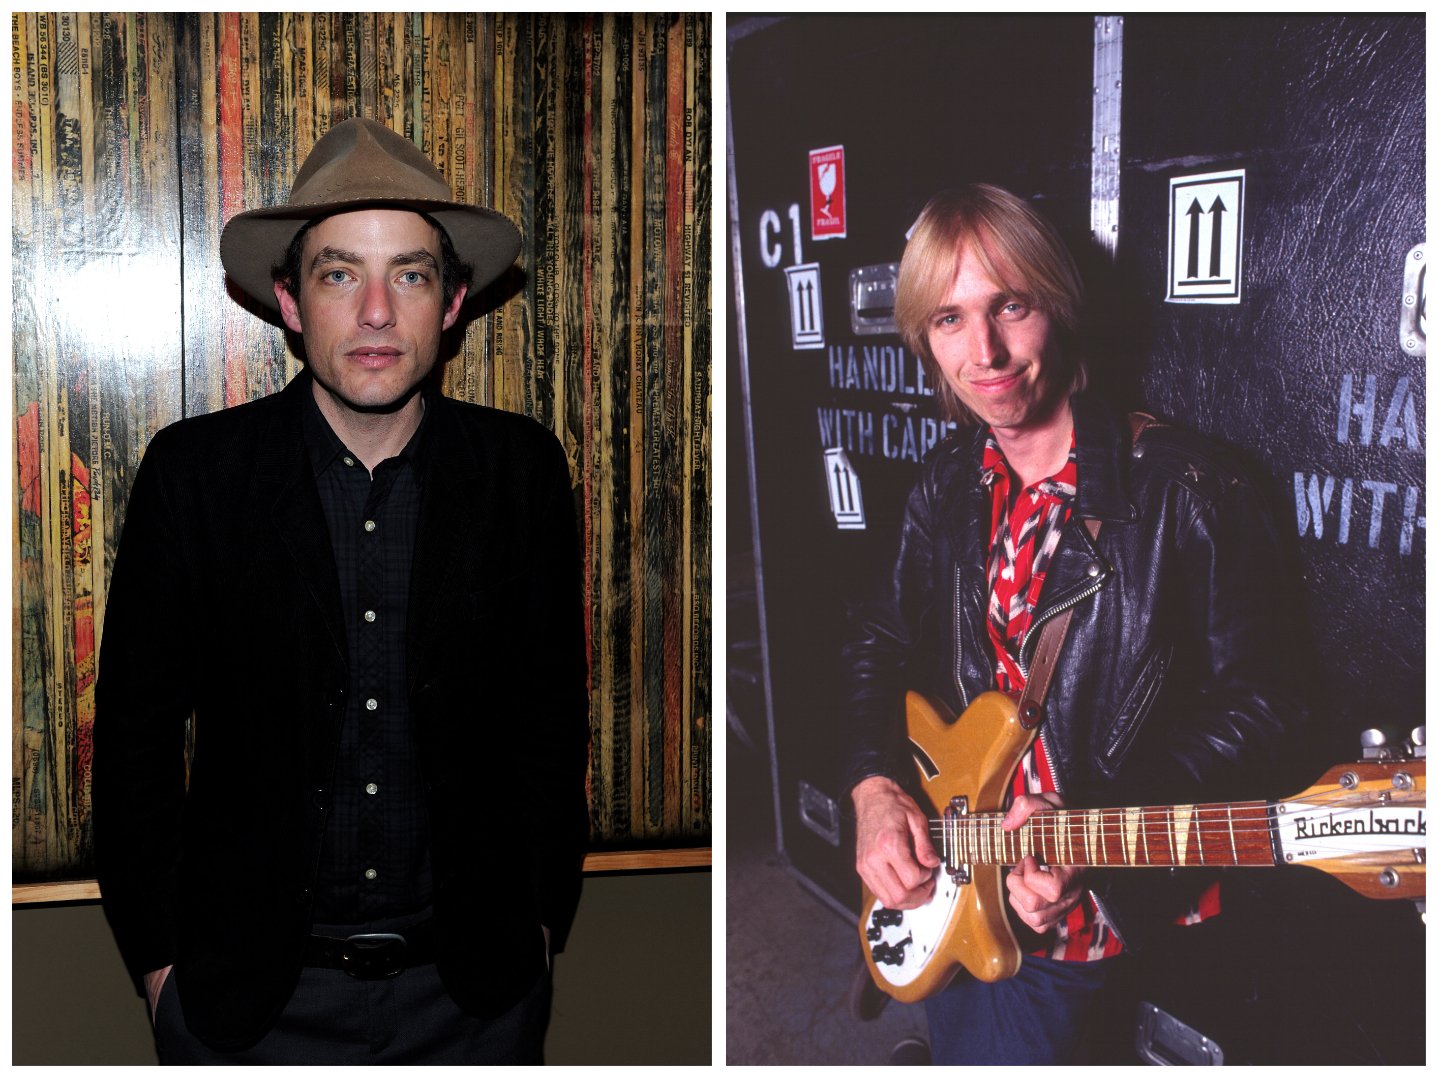 Bob Dylan's son Jakob wears a hat and stands in front of a wall. Tom Petty wears a leather jacket and holds a guitar.